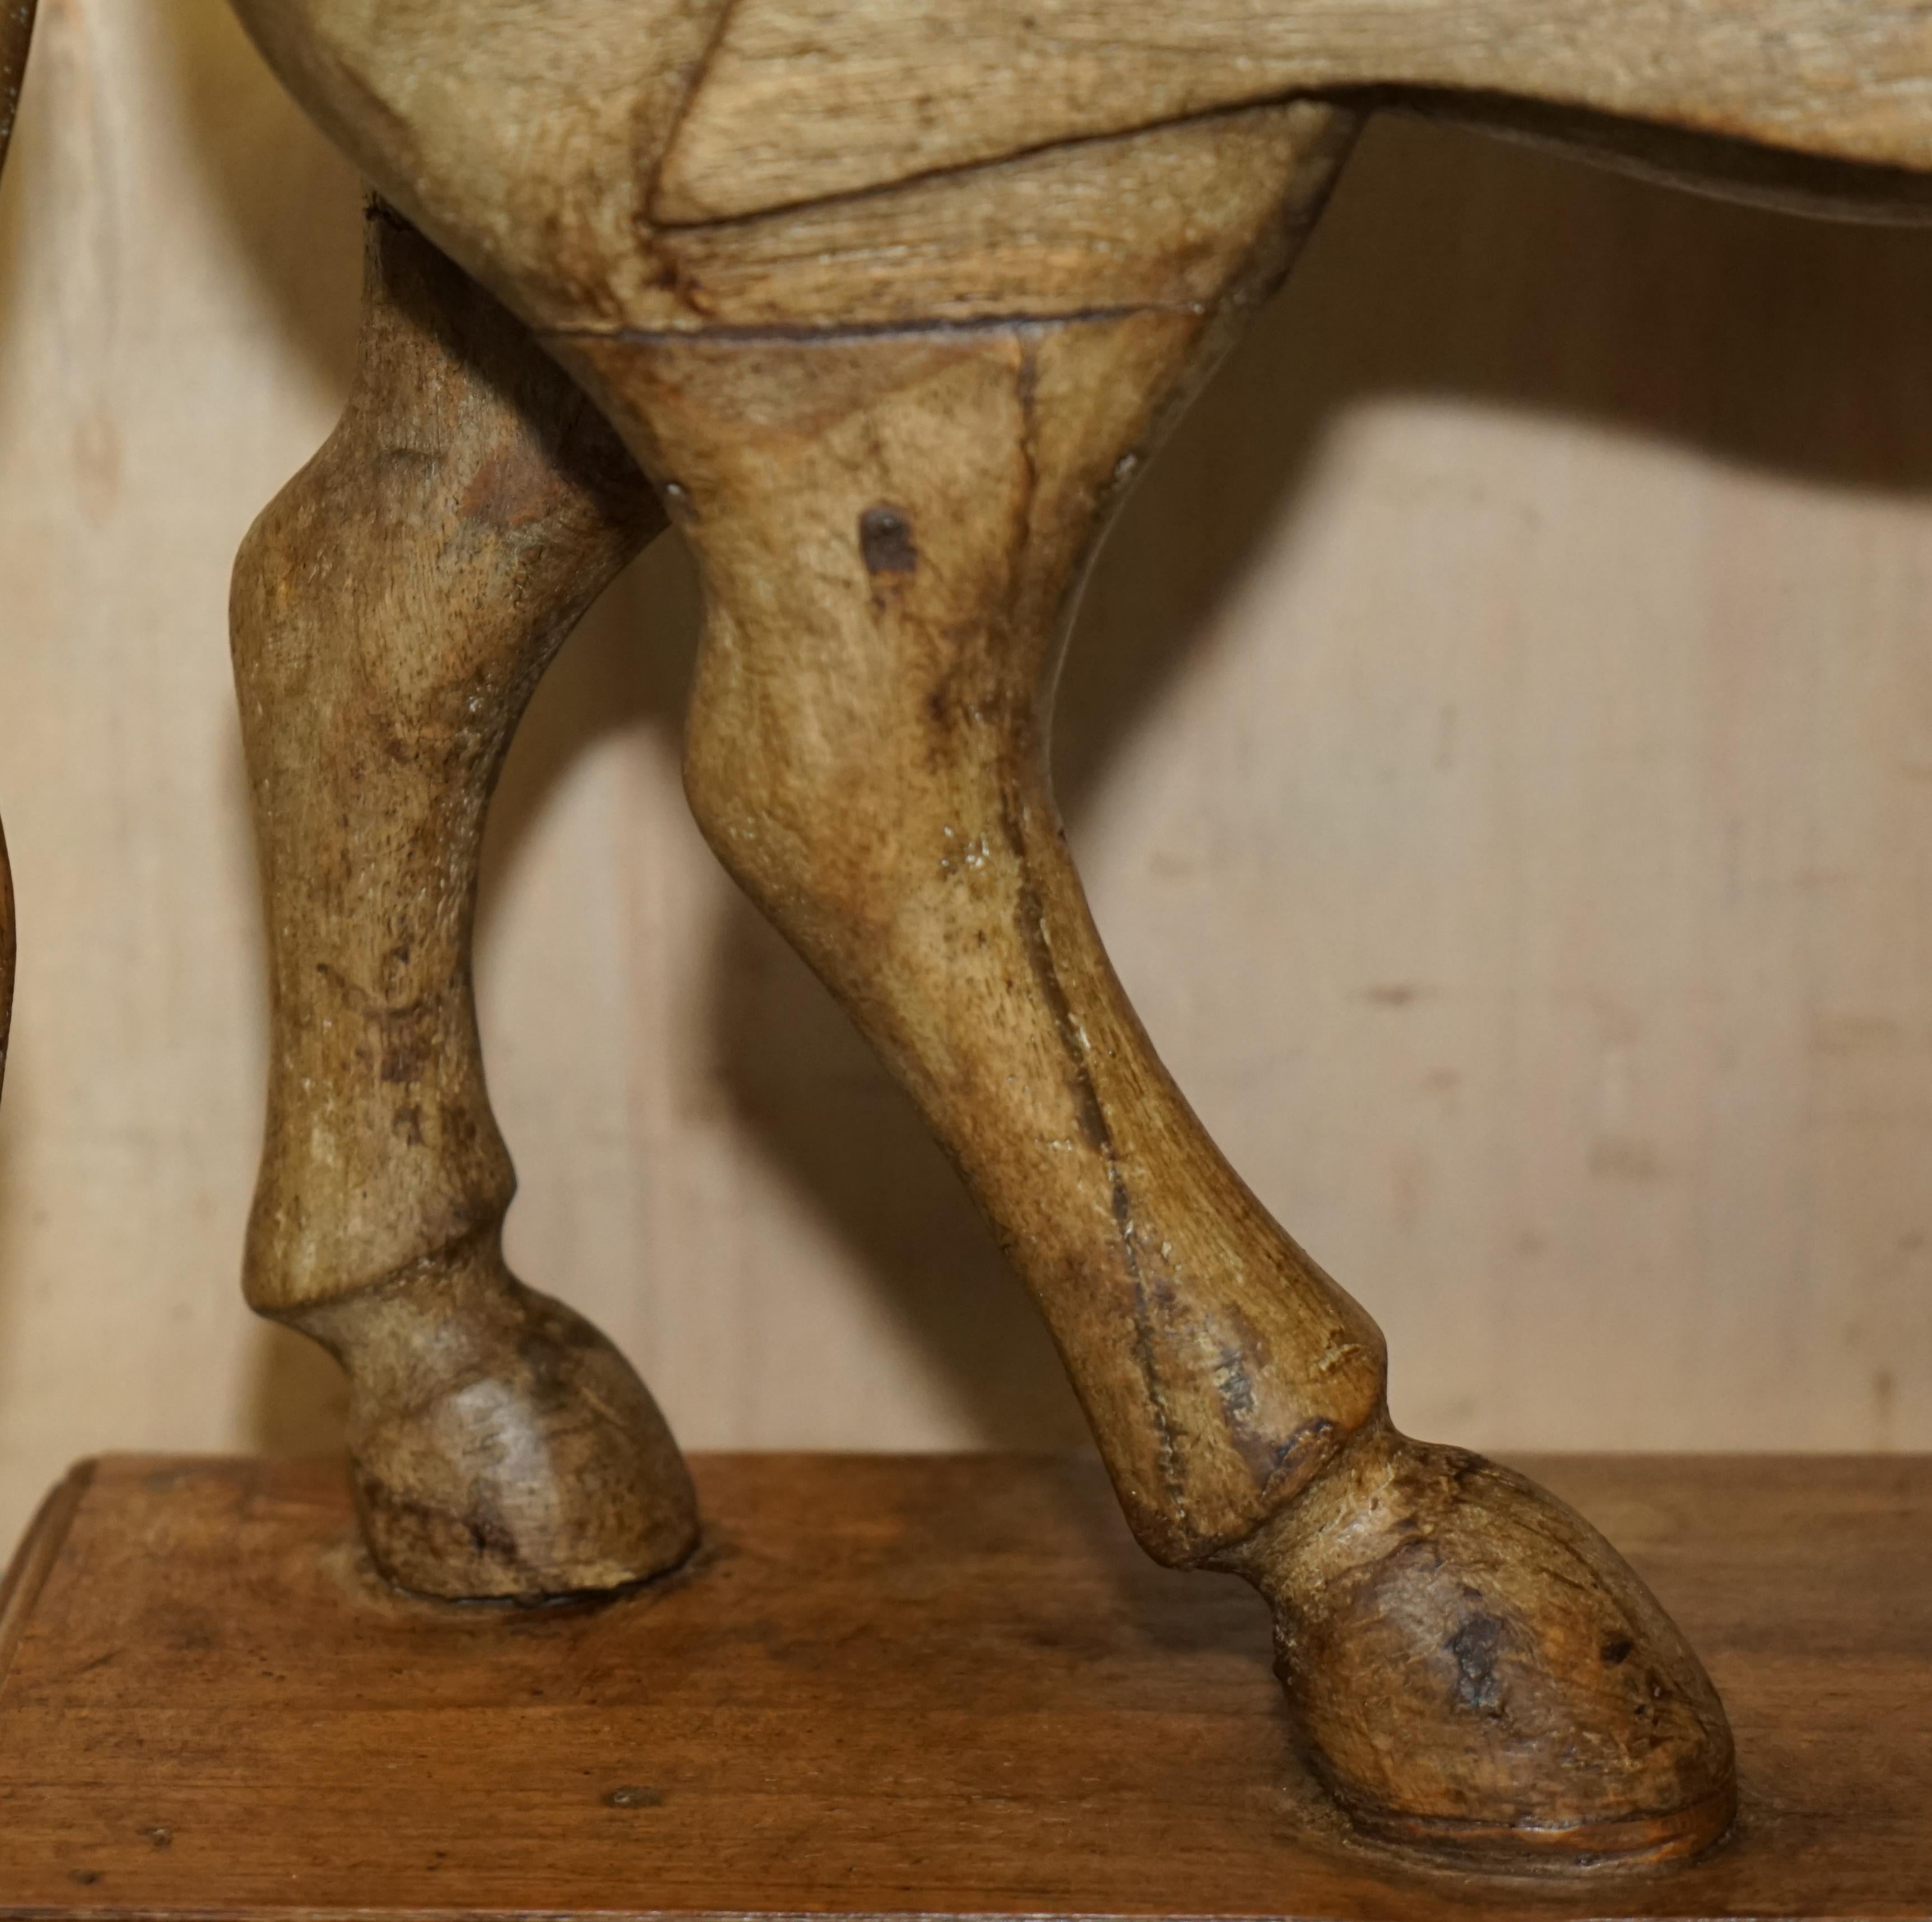 PAiR OF DECORATIVE ANTIQUE HAND CARved WOODEN STATUES OF A LOVELY HORSES im Angebot 5